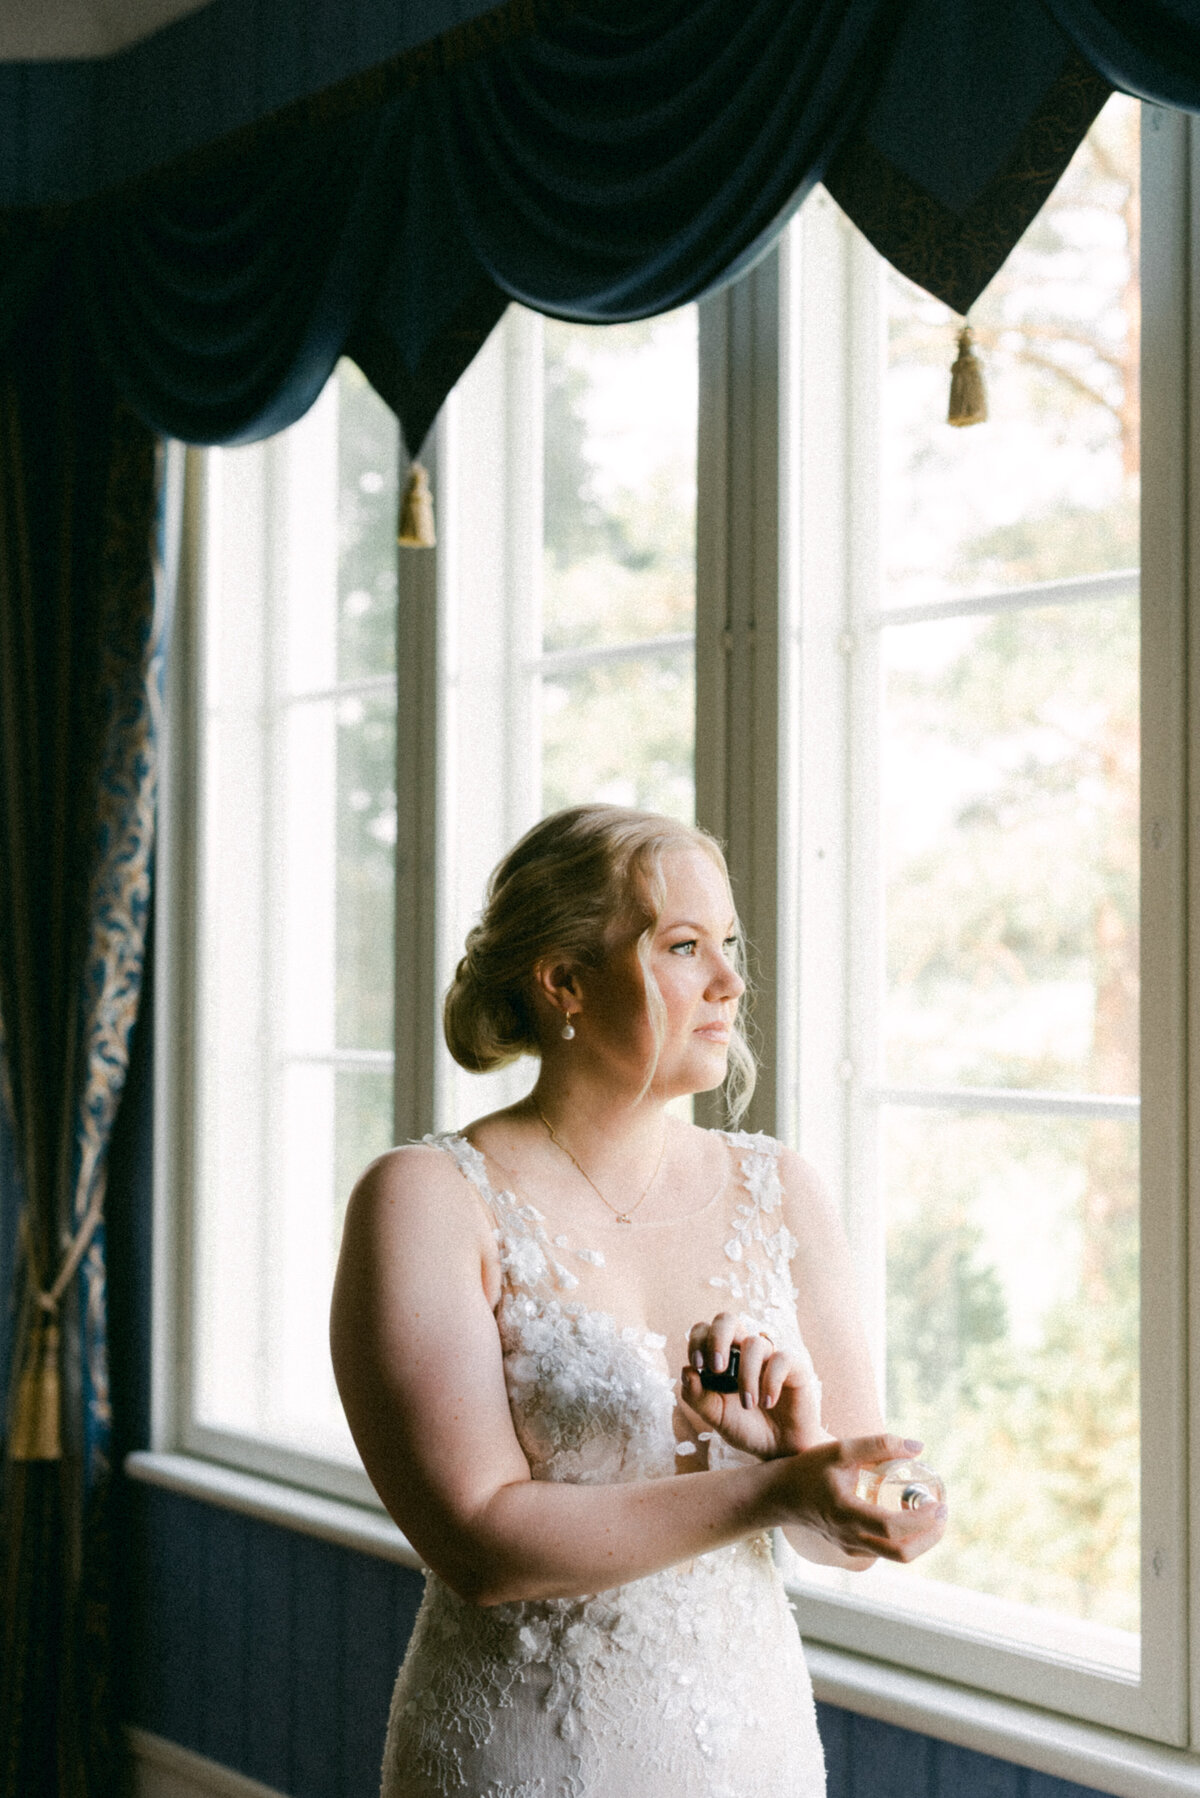 The bride putting on the perfume in an image photographed by wedding photographer Hannika Gabrielsson.